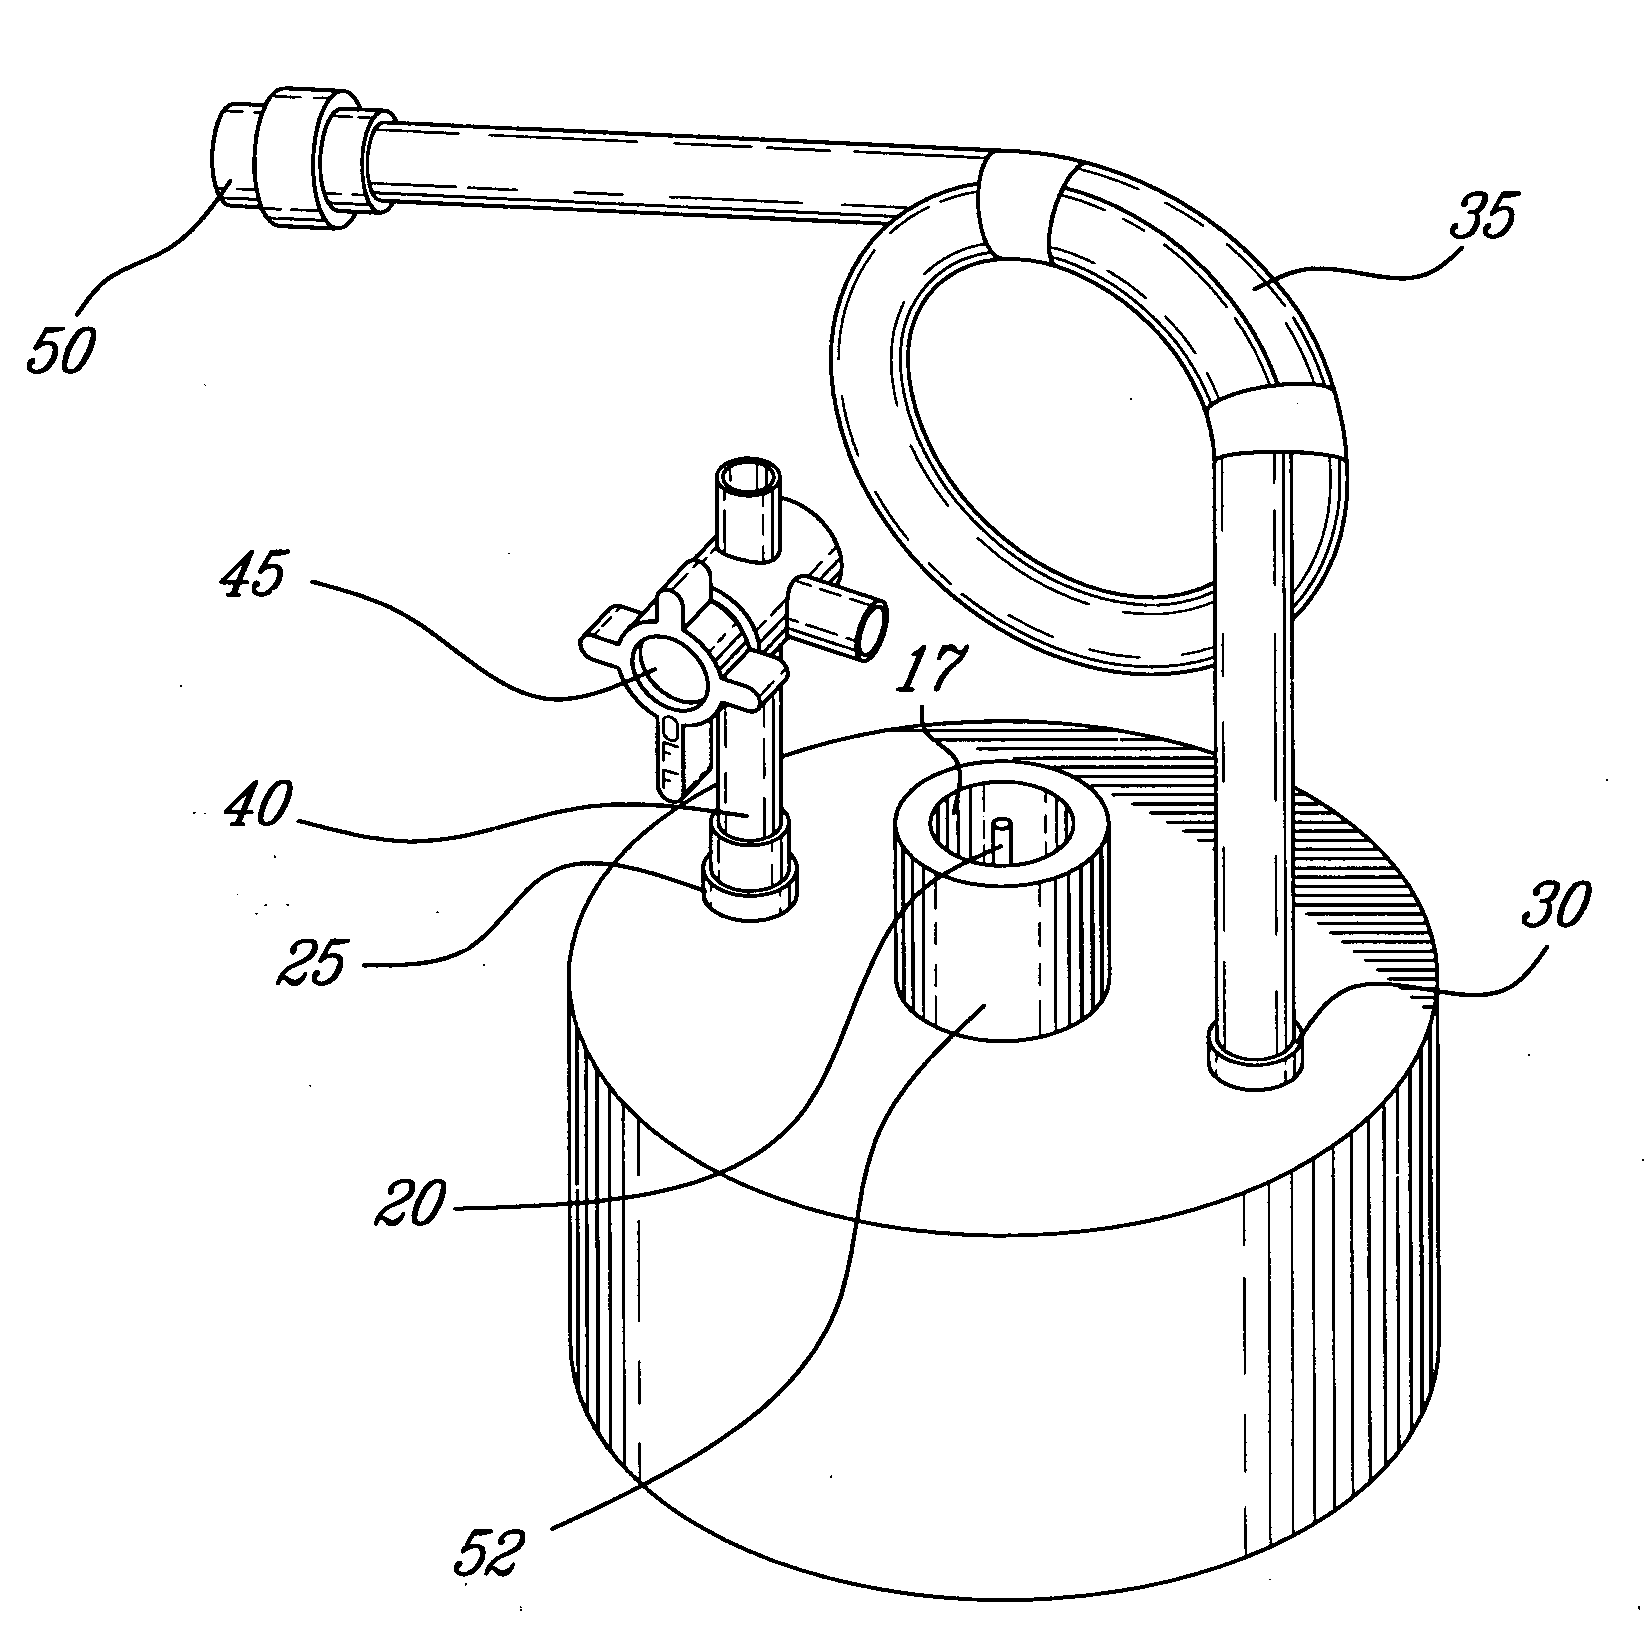 Apparatus and method for measuring the surface flux of a soil gas component